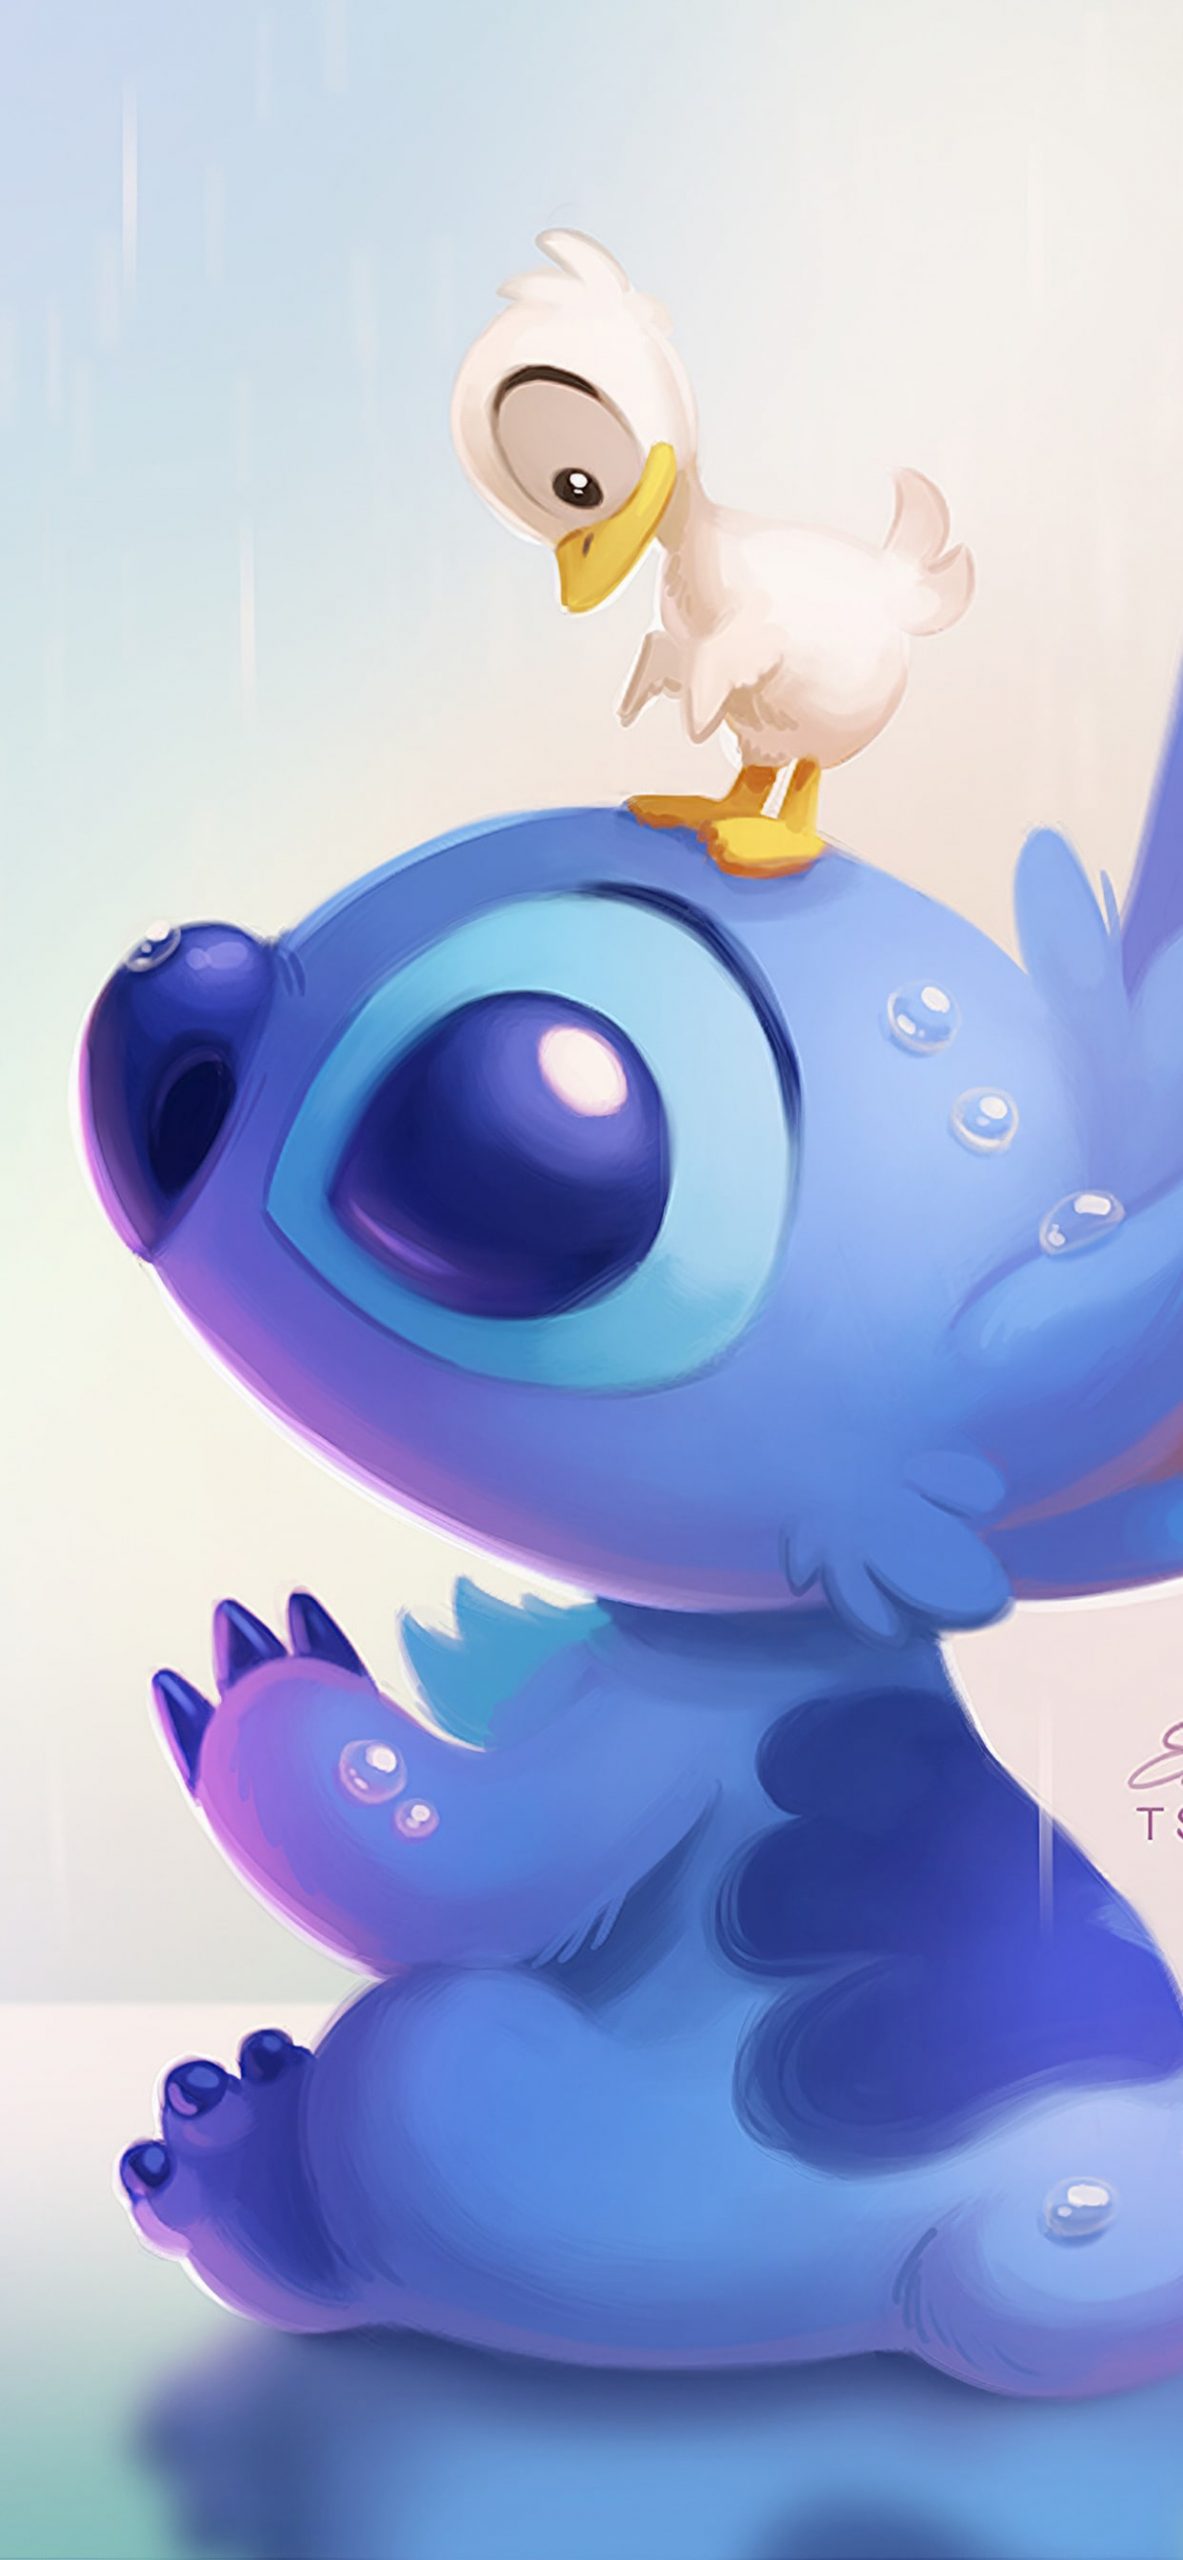 Cute Stitch Wallpapers